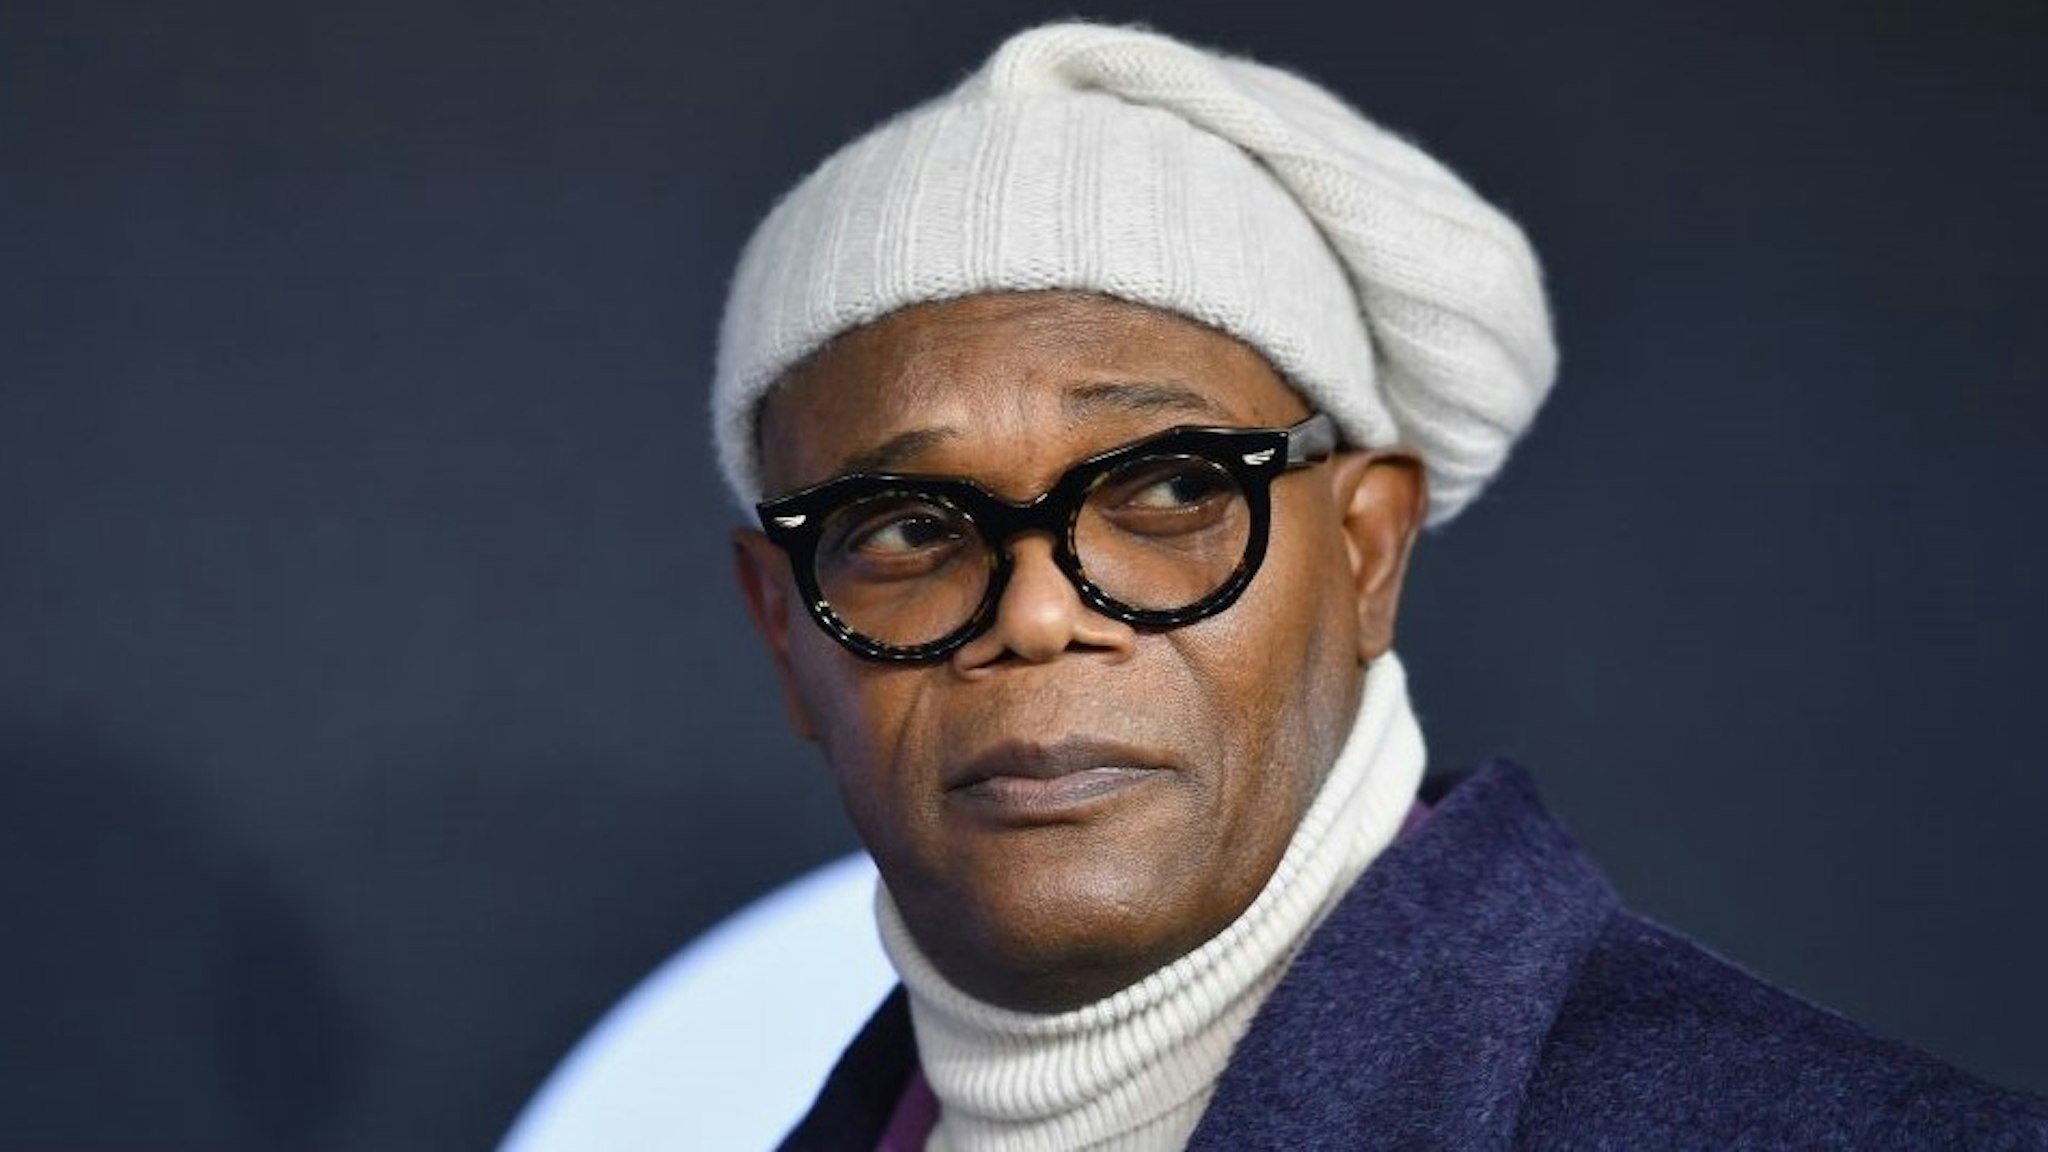 Actor Samuel L. Jackson attends the premiere of Universal Pictures' "Glass" at SVA Theatre on January 15, 2019 in New York City. (Photo by Angela Weiss / AFP) (Photo credit should read